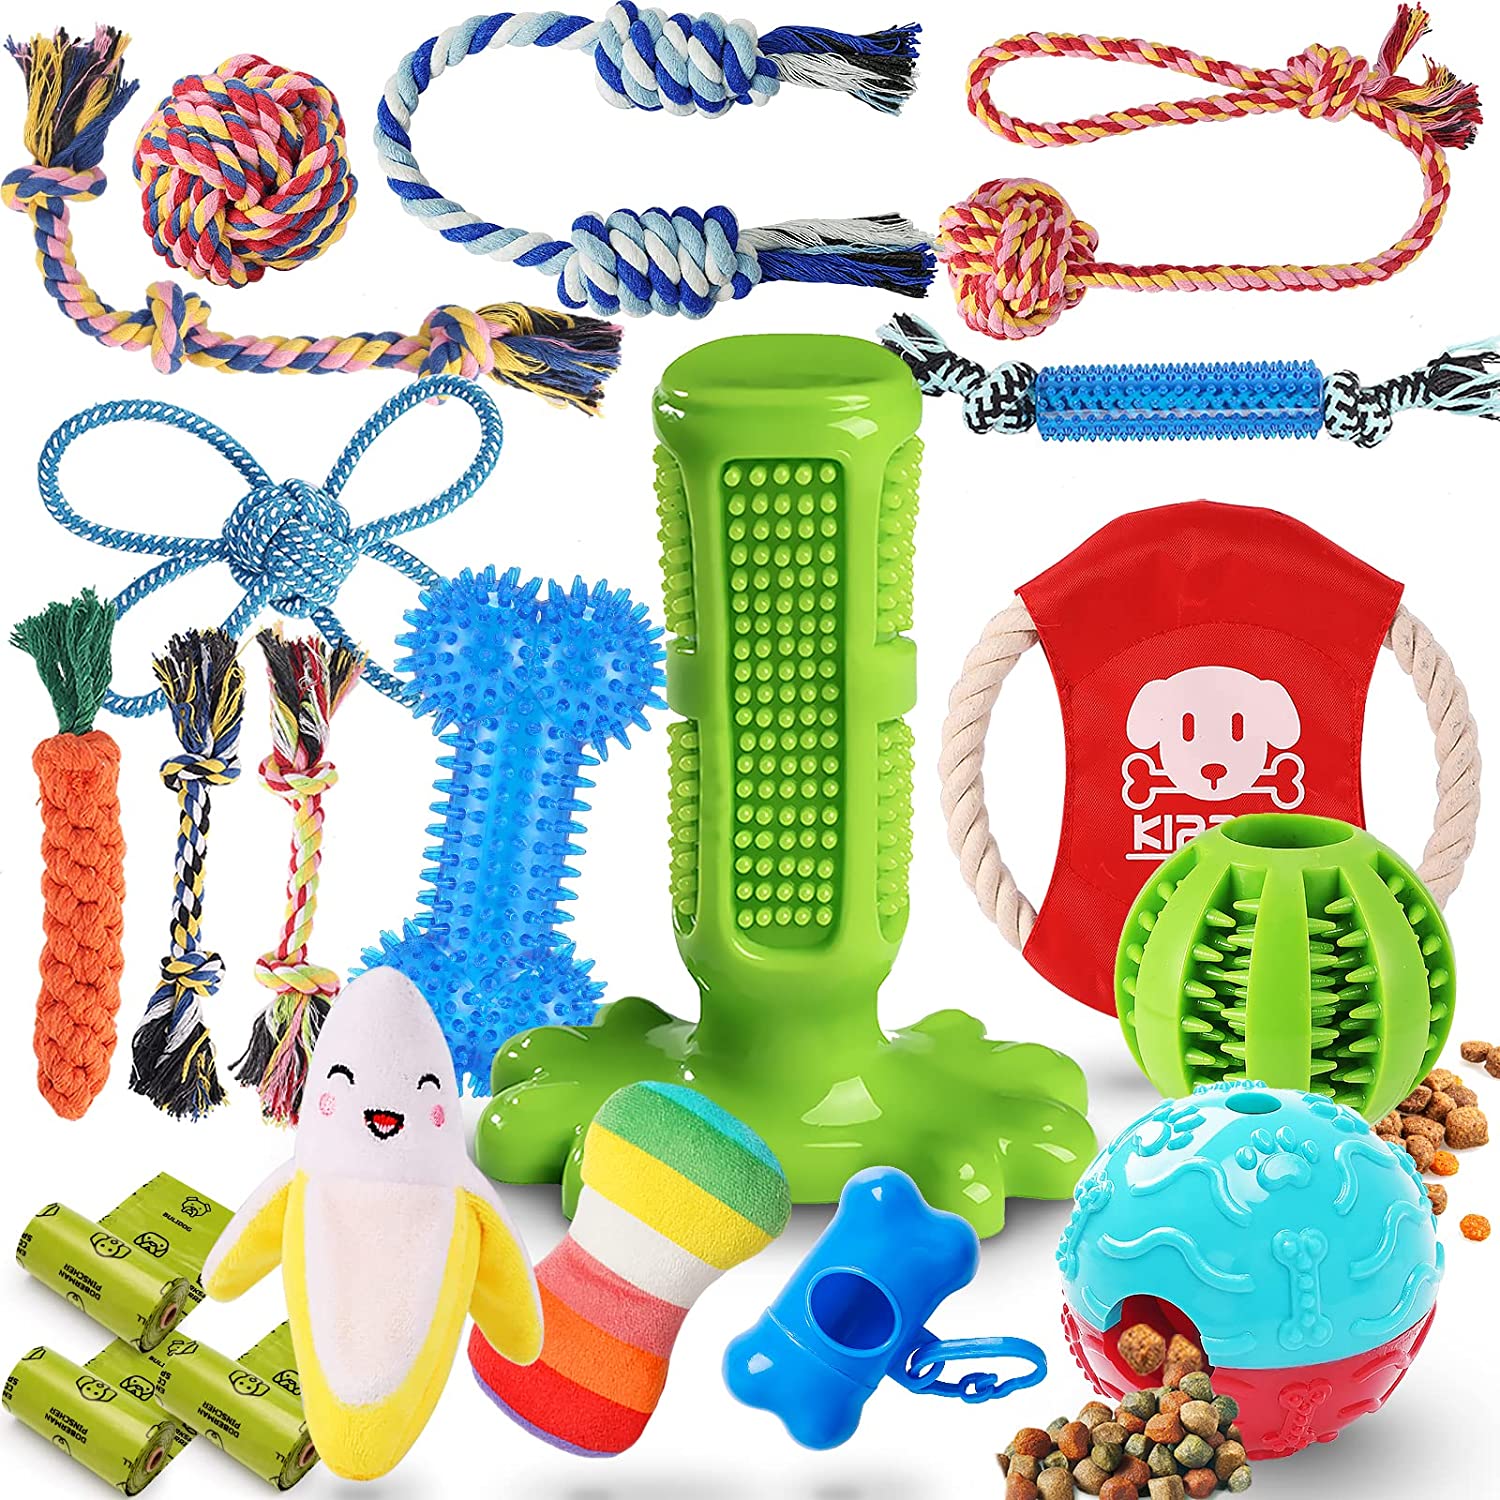 13 Best Safe Chew Toys For Puppies